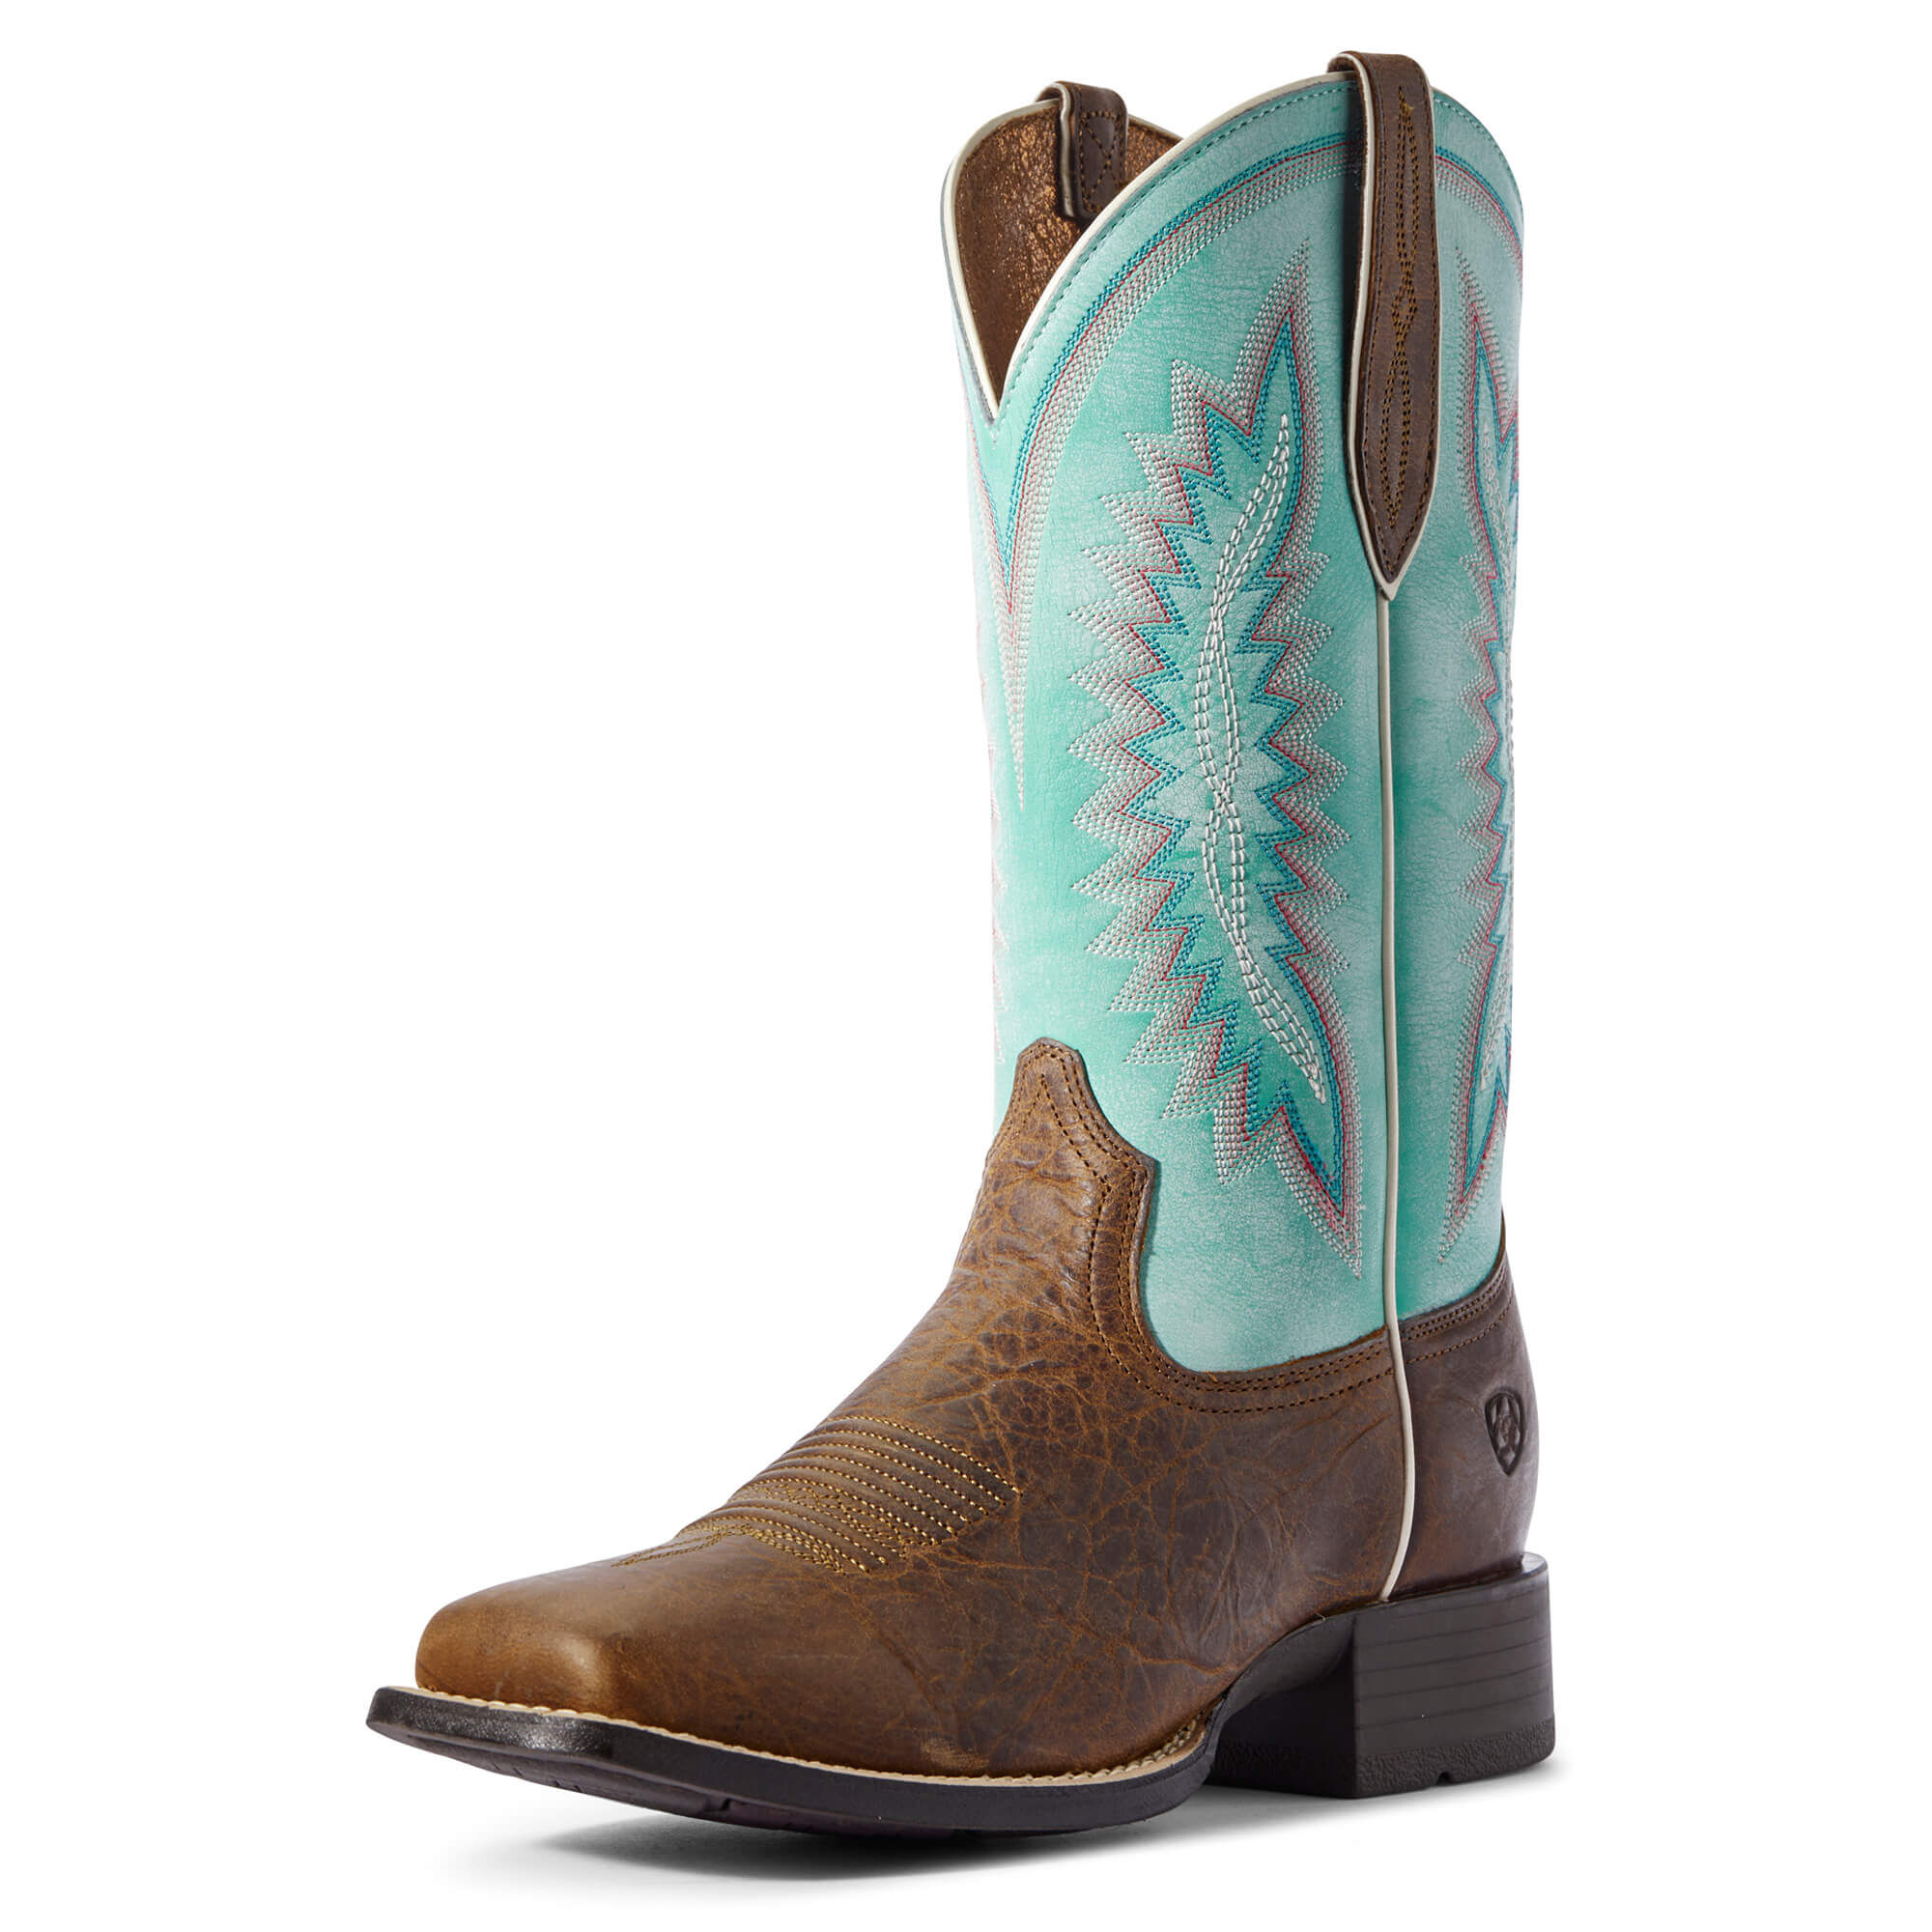 Women's Quickdraw Legacy Western Boots in Natural Crunch Leather  by Ariat